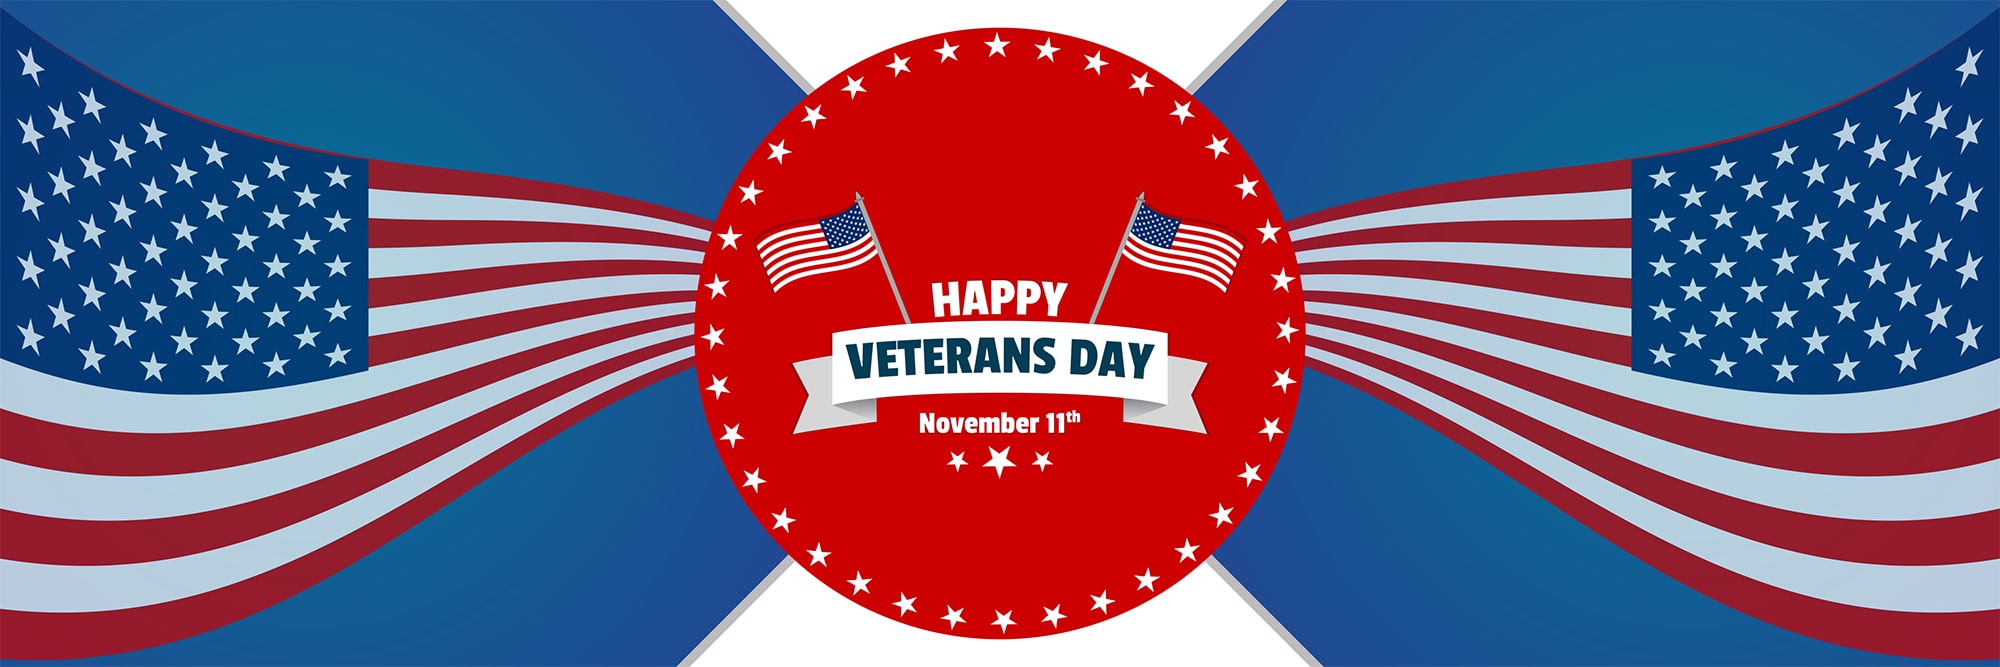 Veterans Day Web banner vector graphics for free download with patriotic elements in background